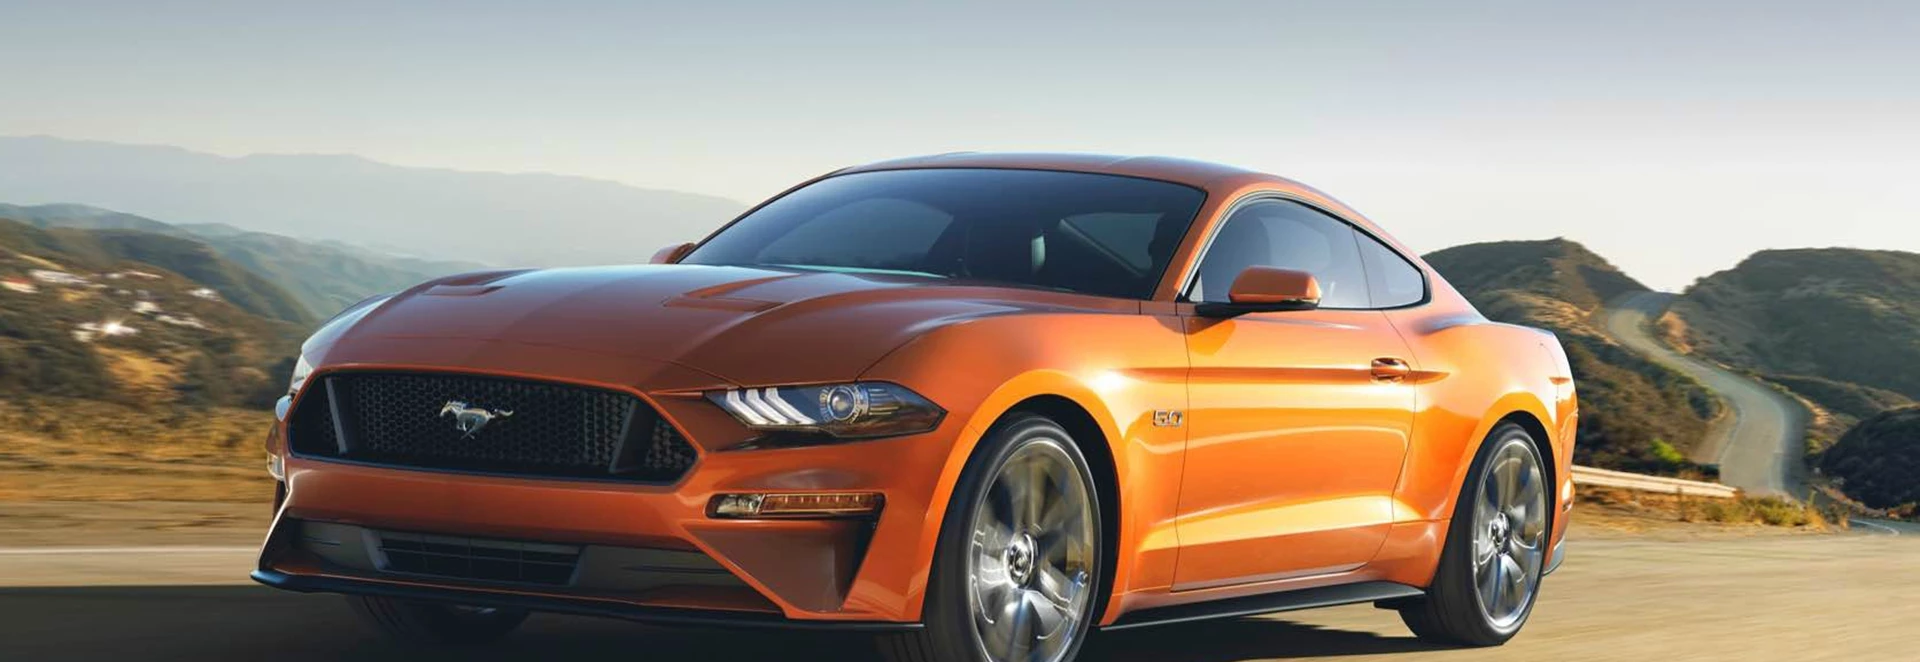 2018 Ford Mustang will come with a Stealth Mode 